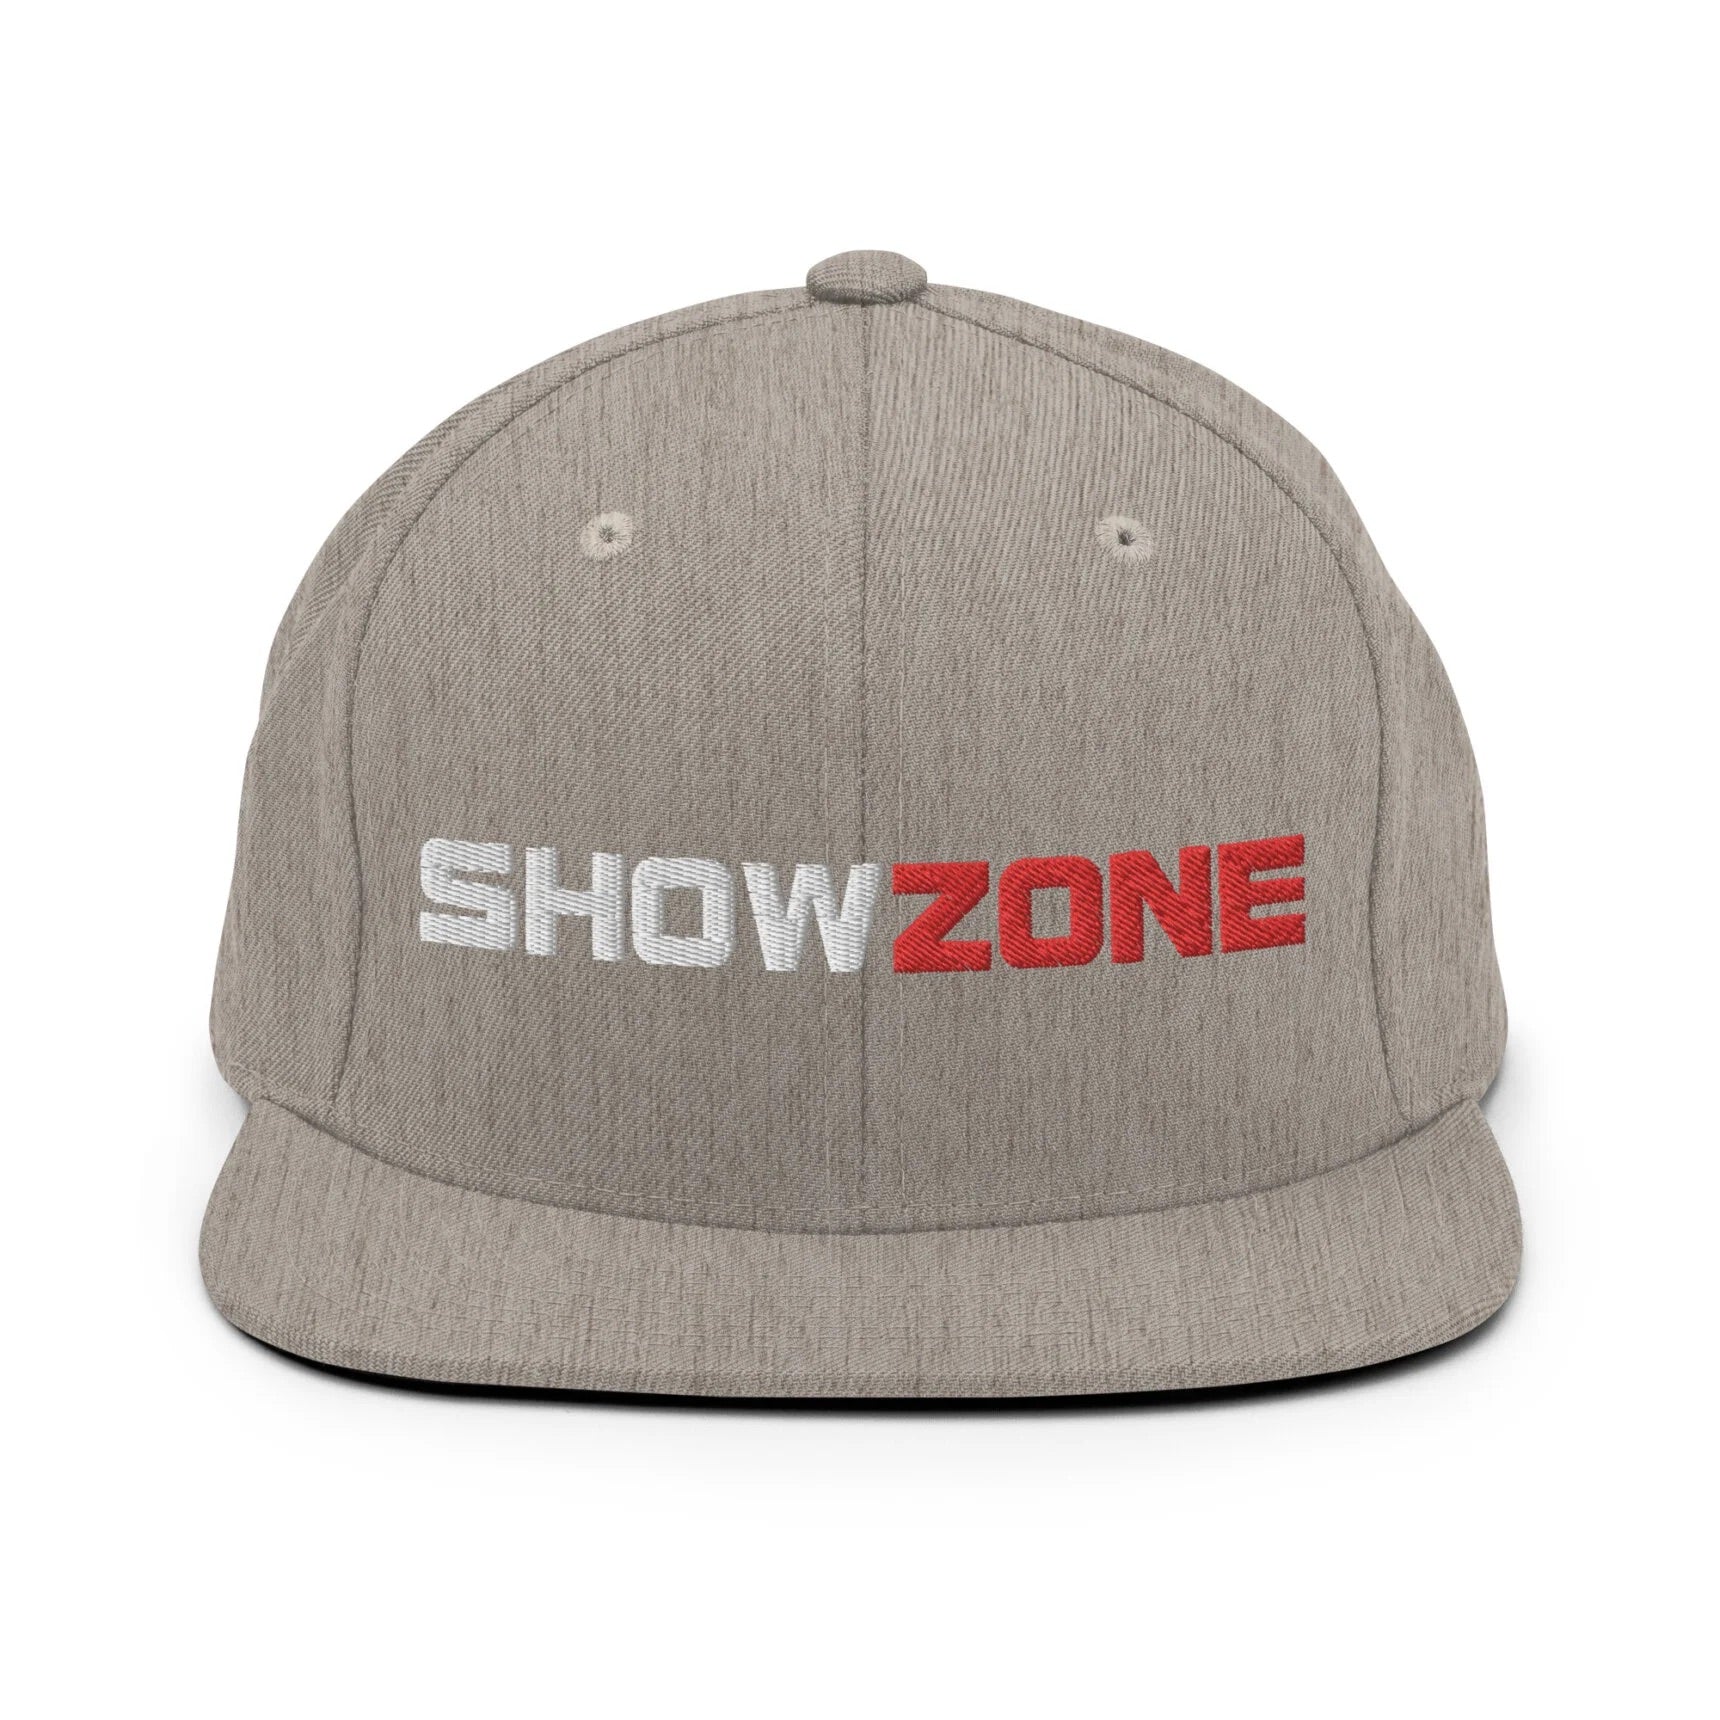 ShowZone snapback hat in heather grey with text logo